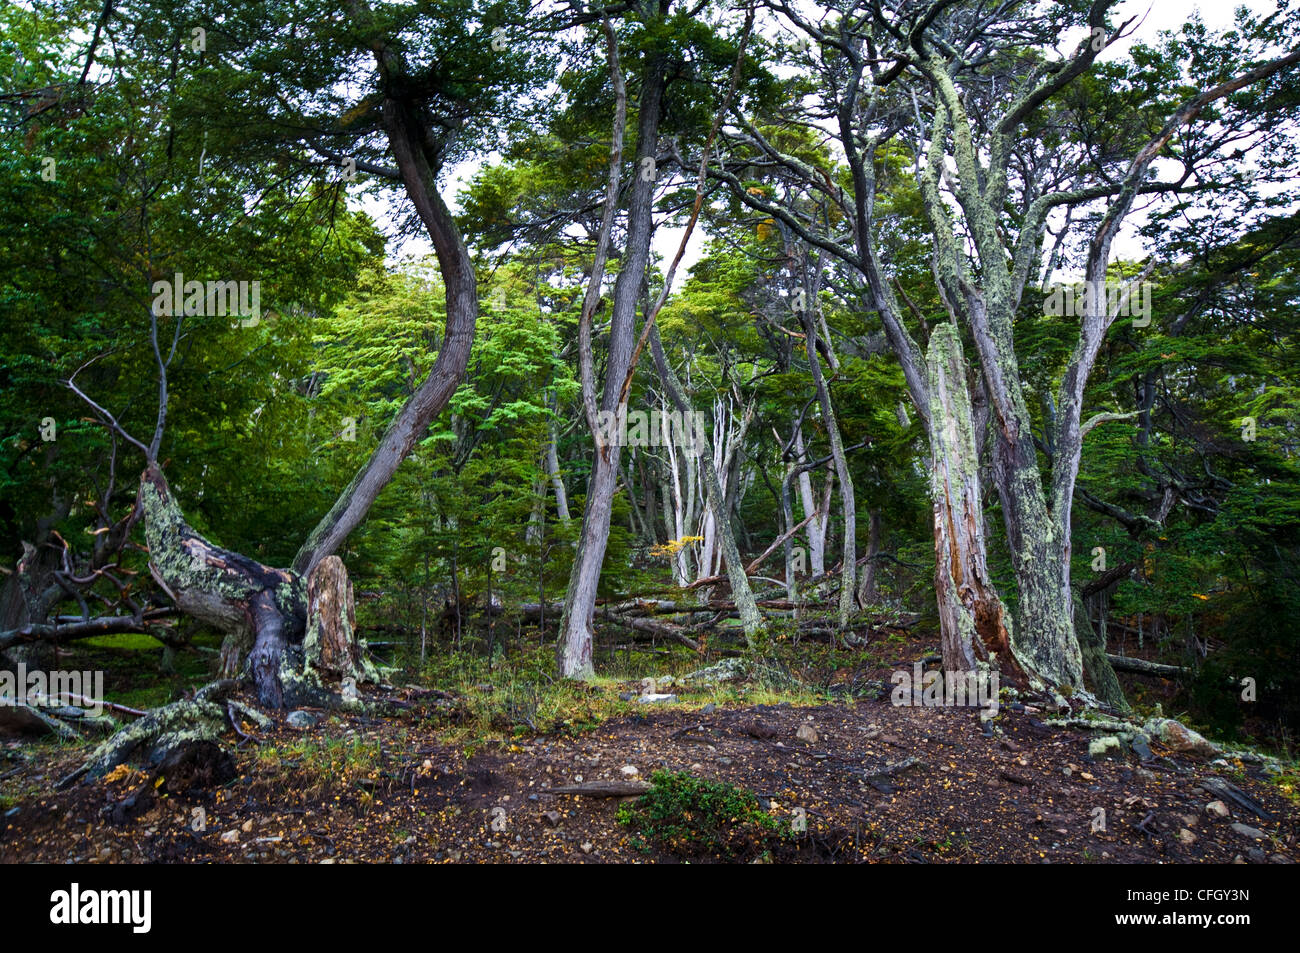 Moss and lichen cover the trunks of beech trees in a dark forest. Stock Photo